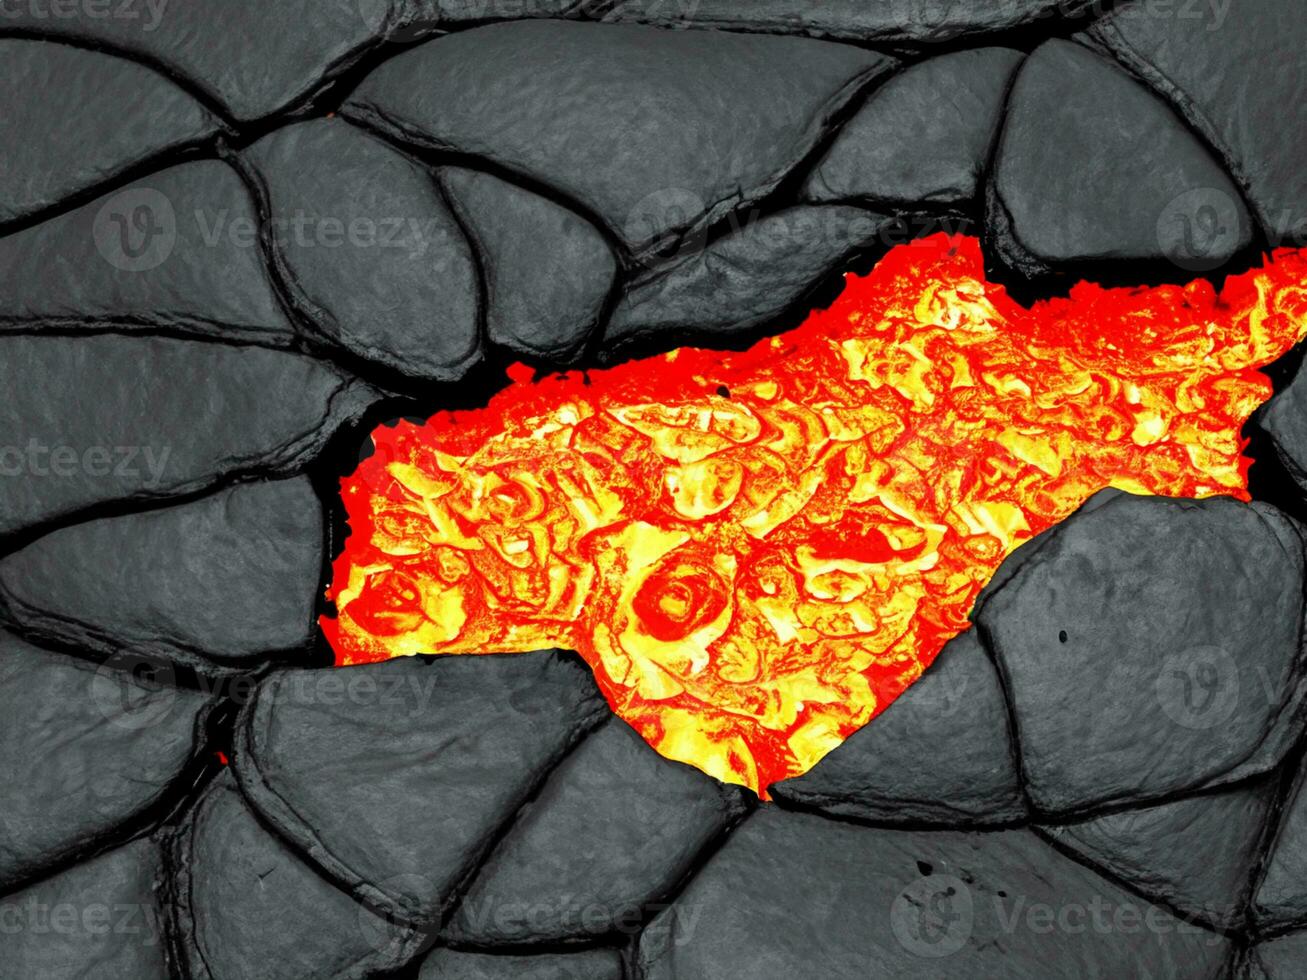 red hot lava texture, 3d render photo